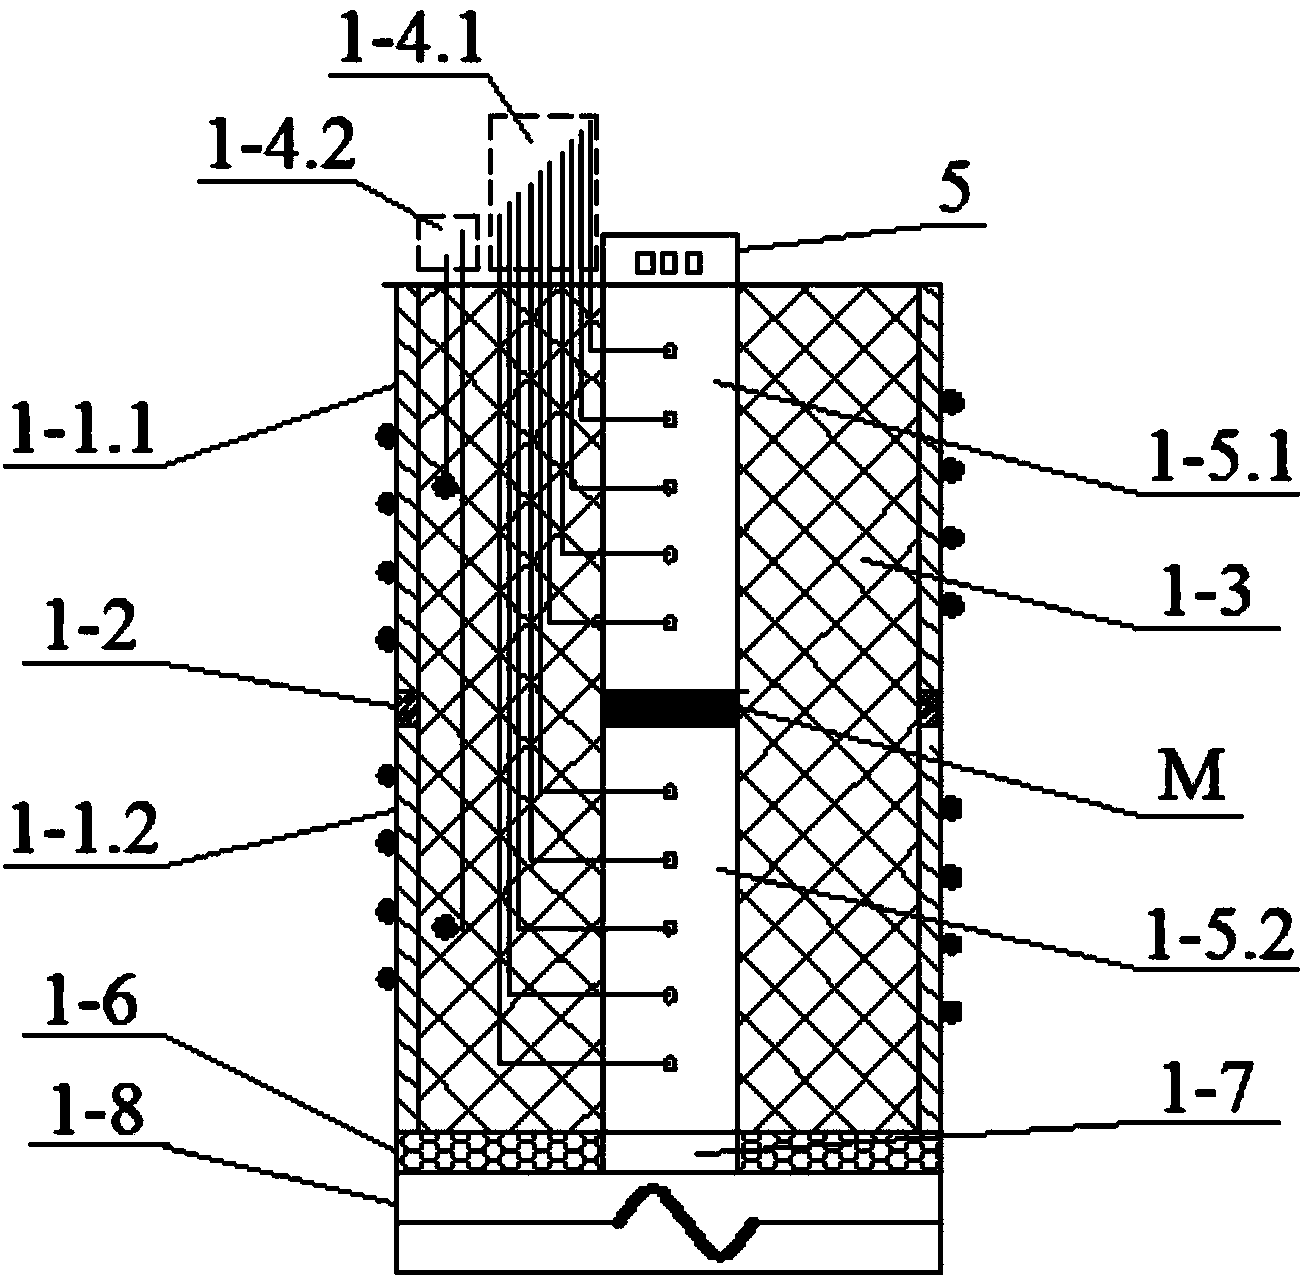 Steady-state method-based heat conductivity coefficient measurement device